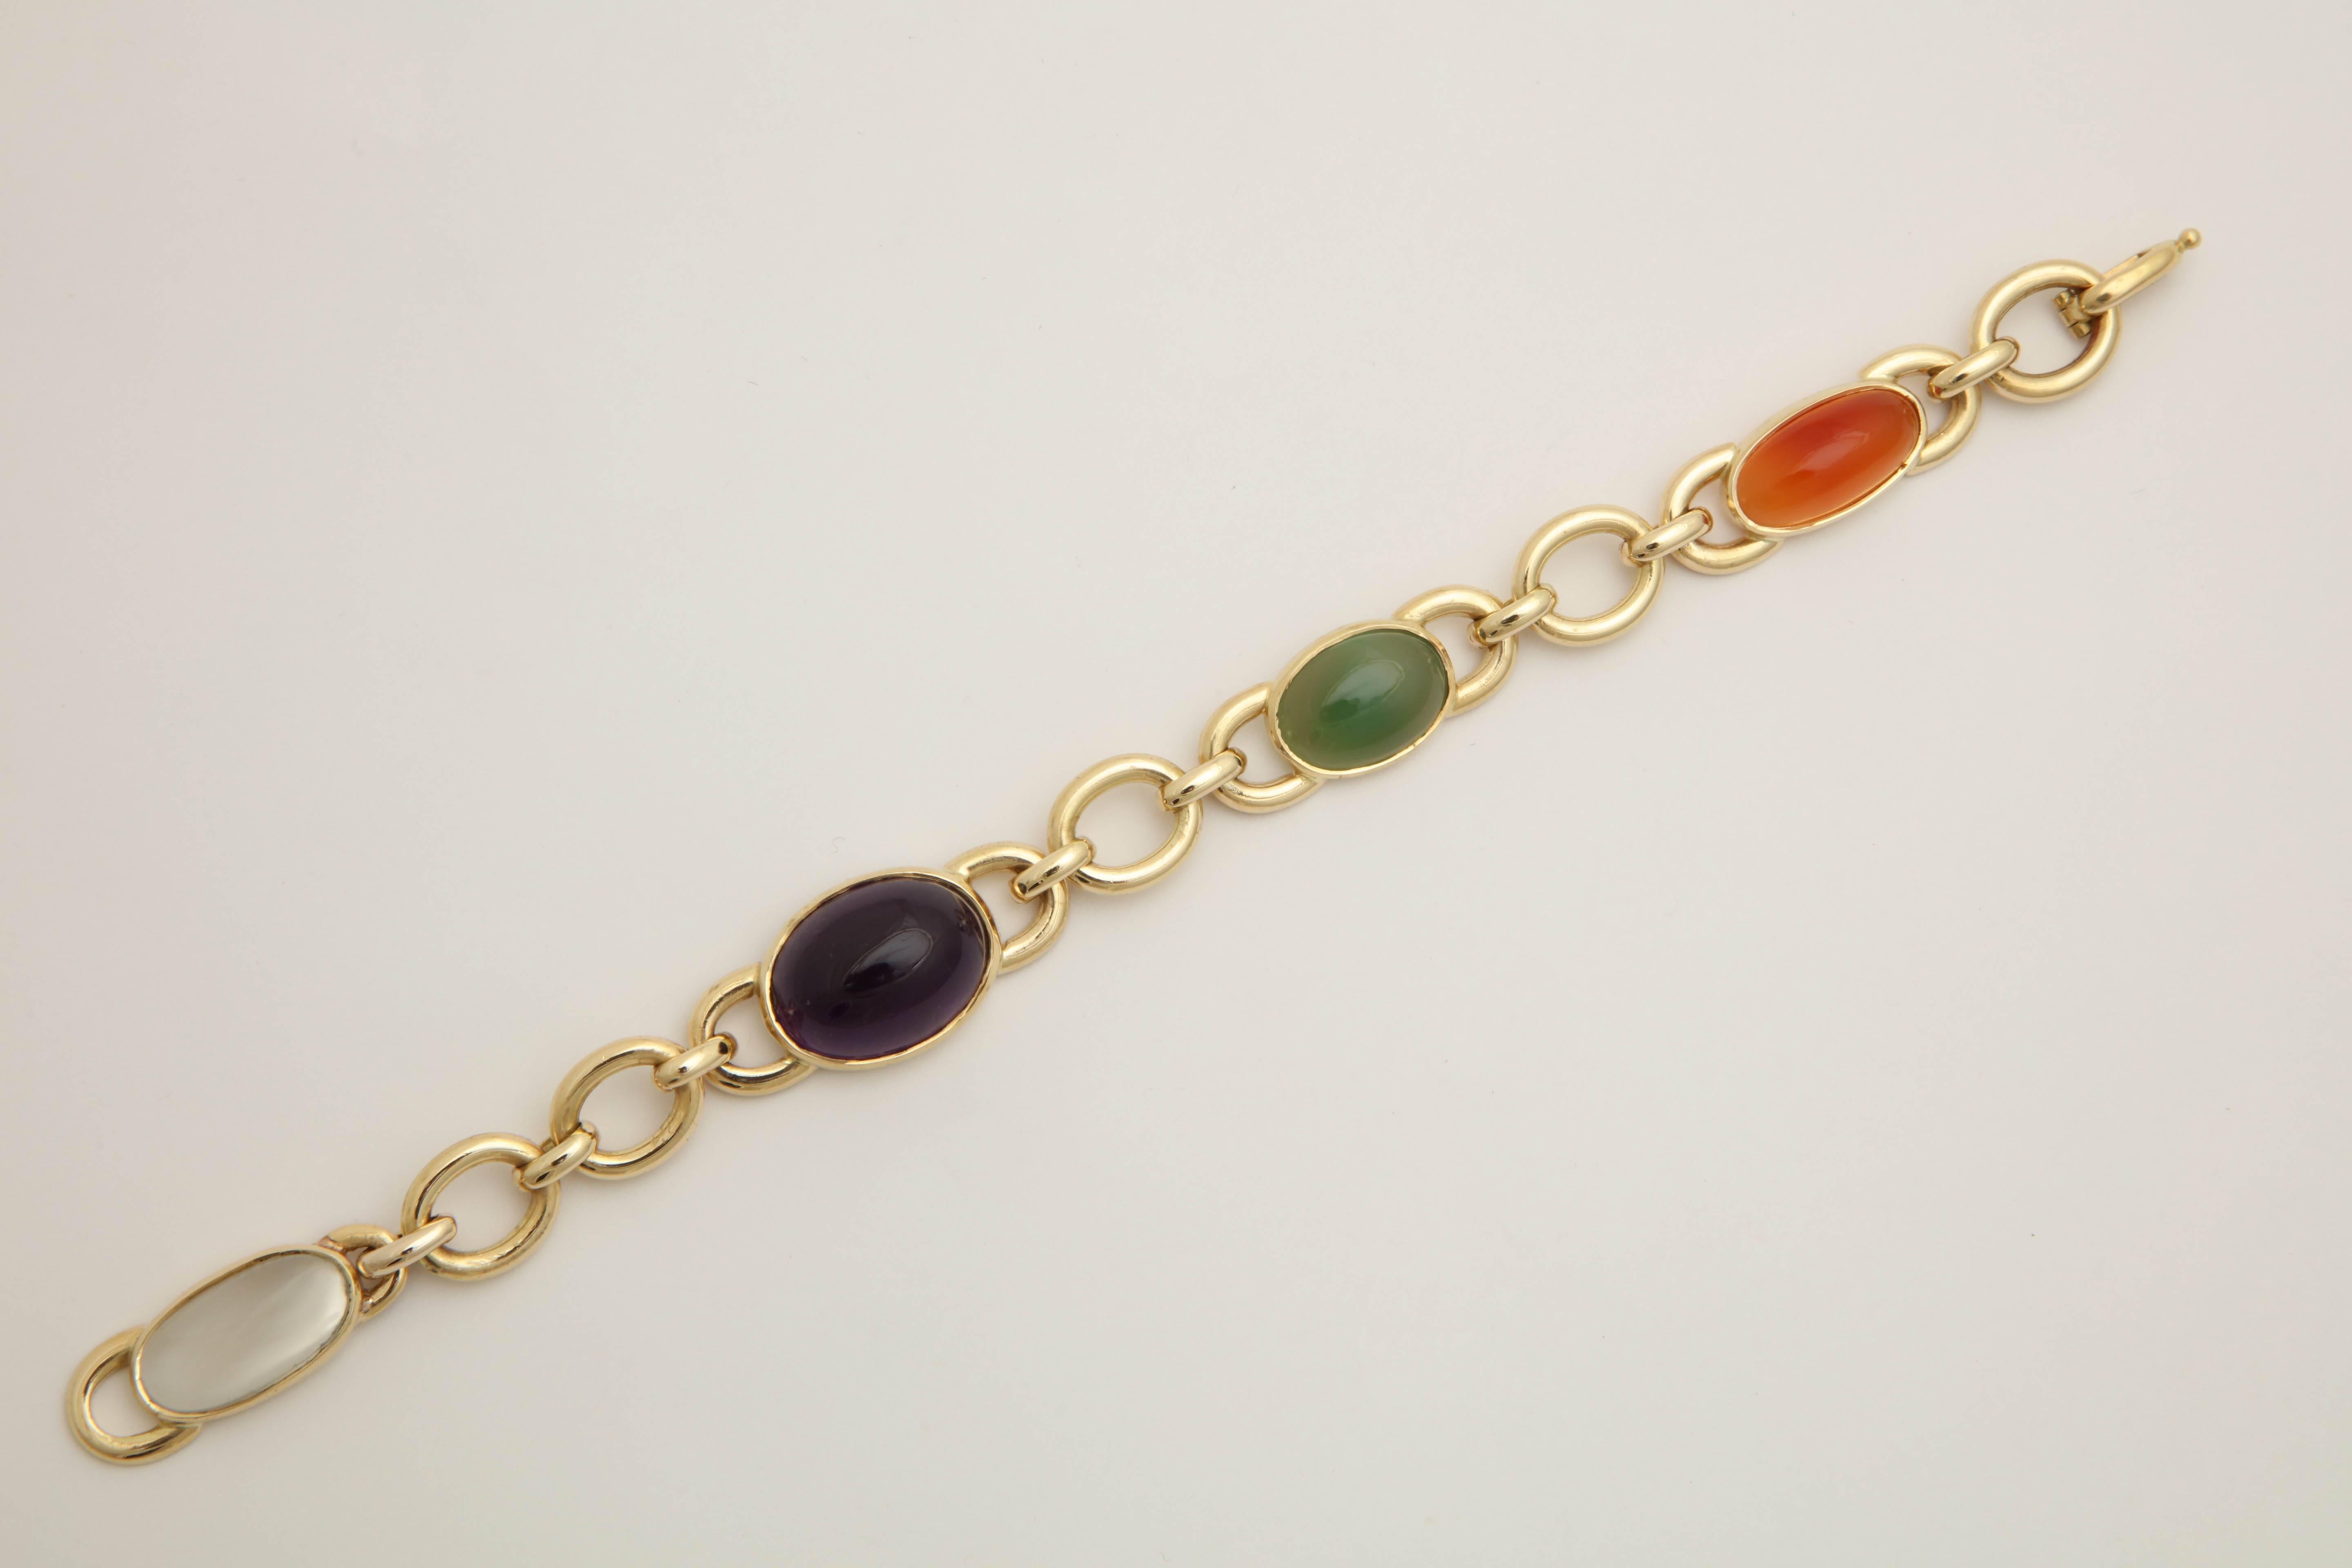 18kt Yellow Link Bracelet Designed With Four Semi Precious Bezel Set Cabochon Stones Consisting Of One Amethyst One Carnelian One Jadeite And One Moonstone.Beautiful And Wearable Link Design Created In Austria In The 1960's.Finished Off with a